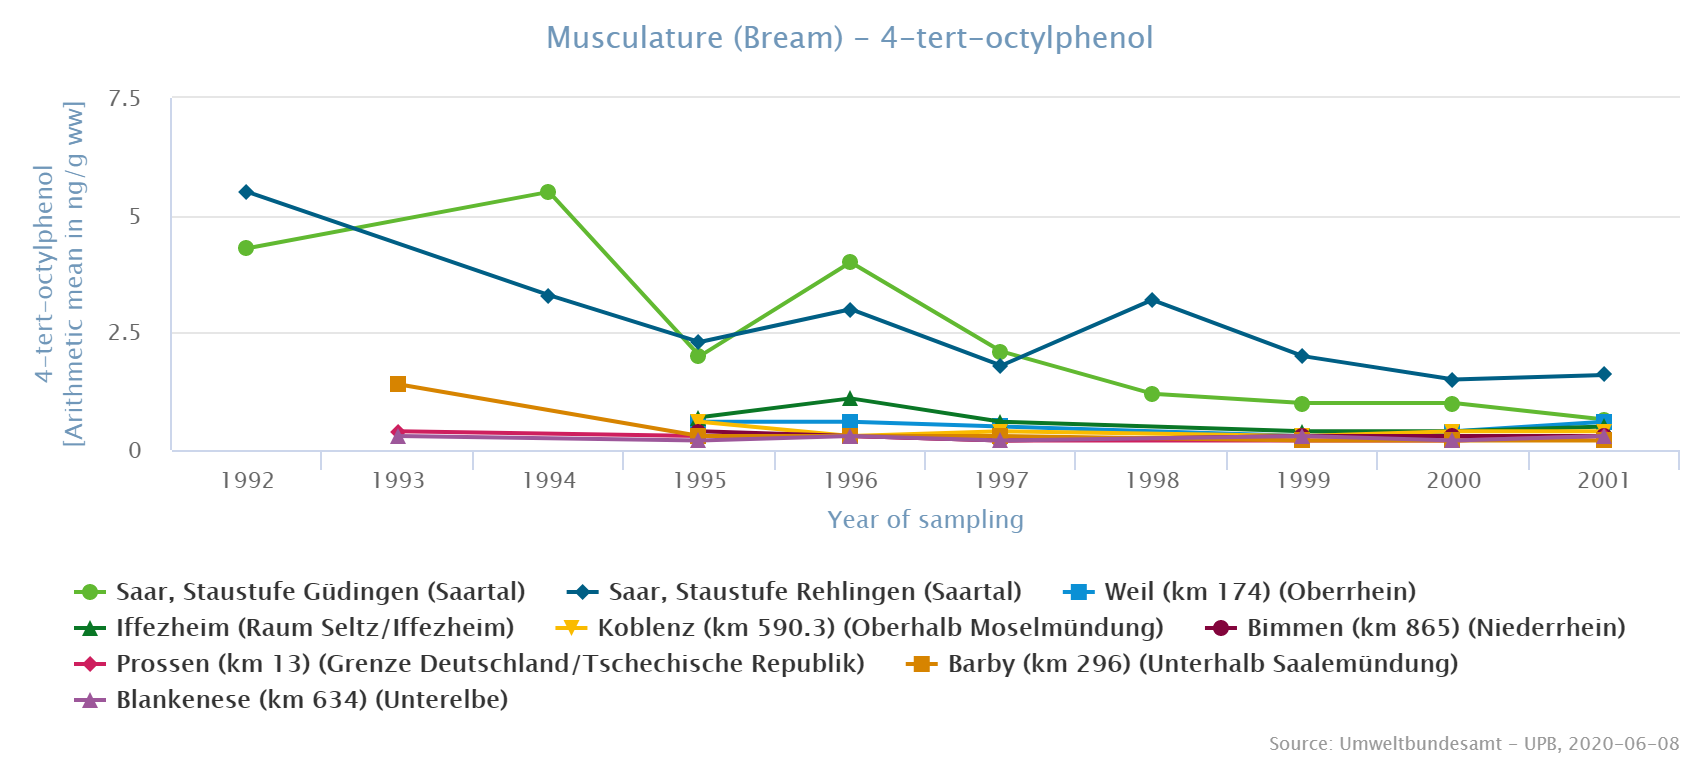 Nonyl compounds clearly dominated in bream while octyl compounds were much lower.